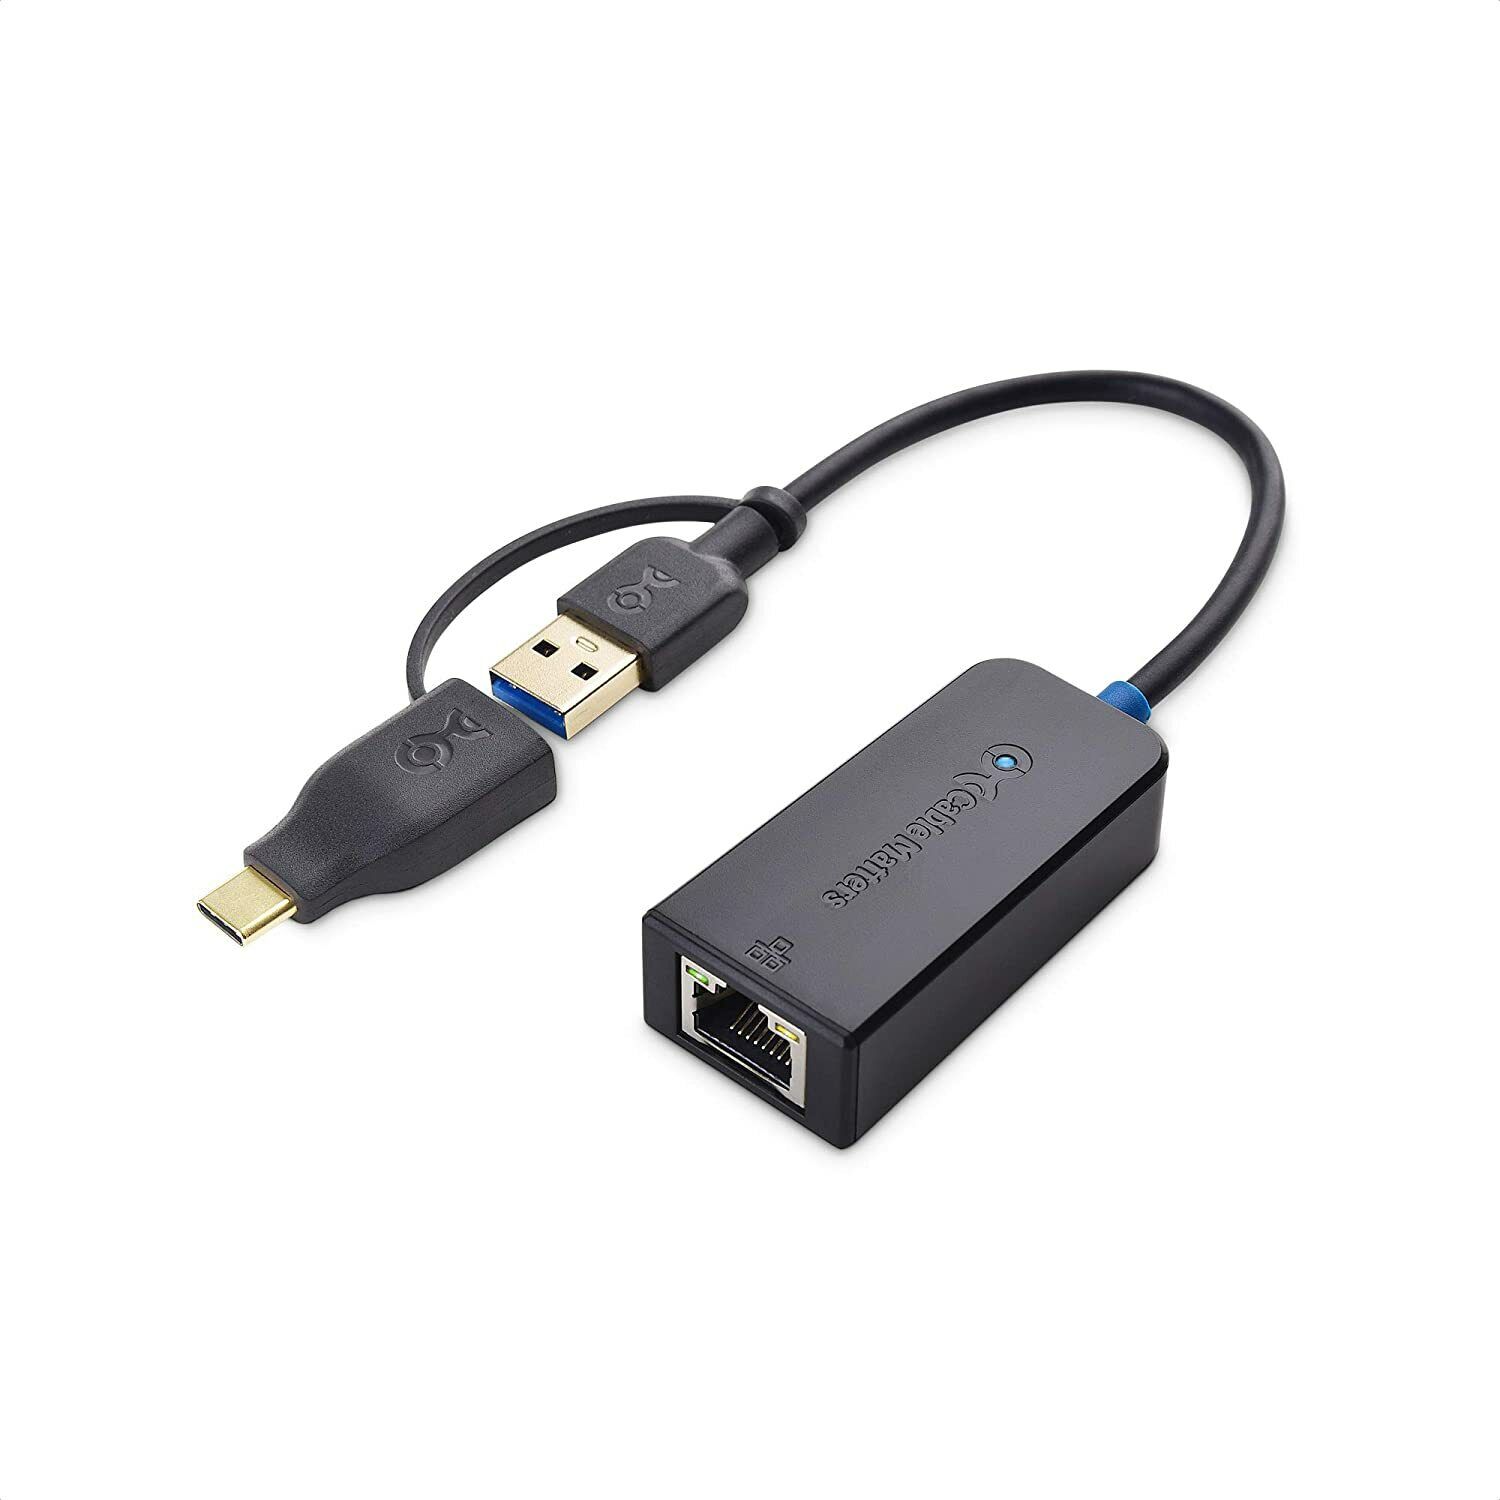 cable matters usb to 2.5g ethernet adapter supporting 2.5 gigabit ethernet netwo